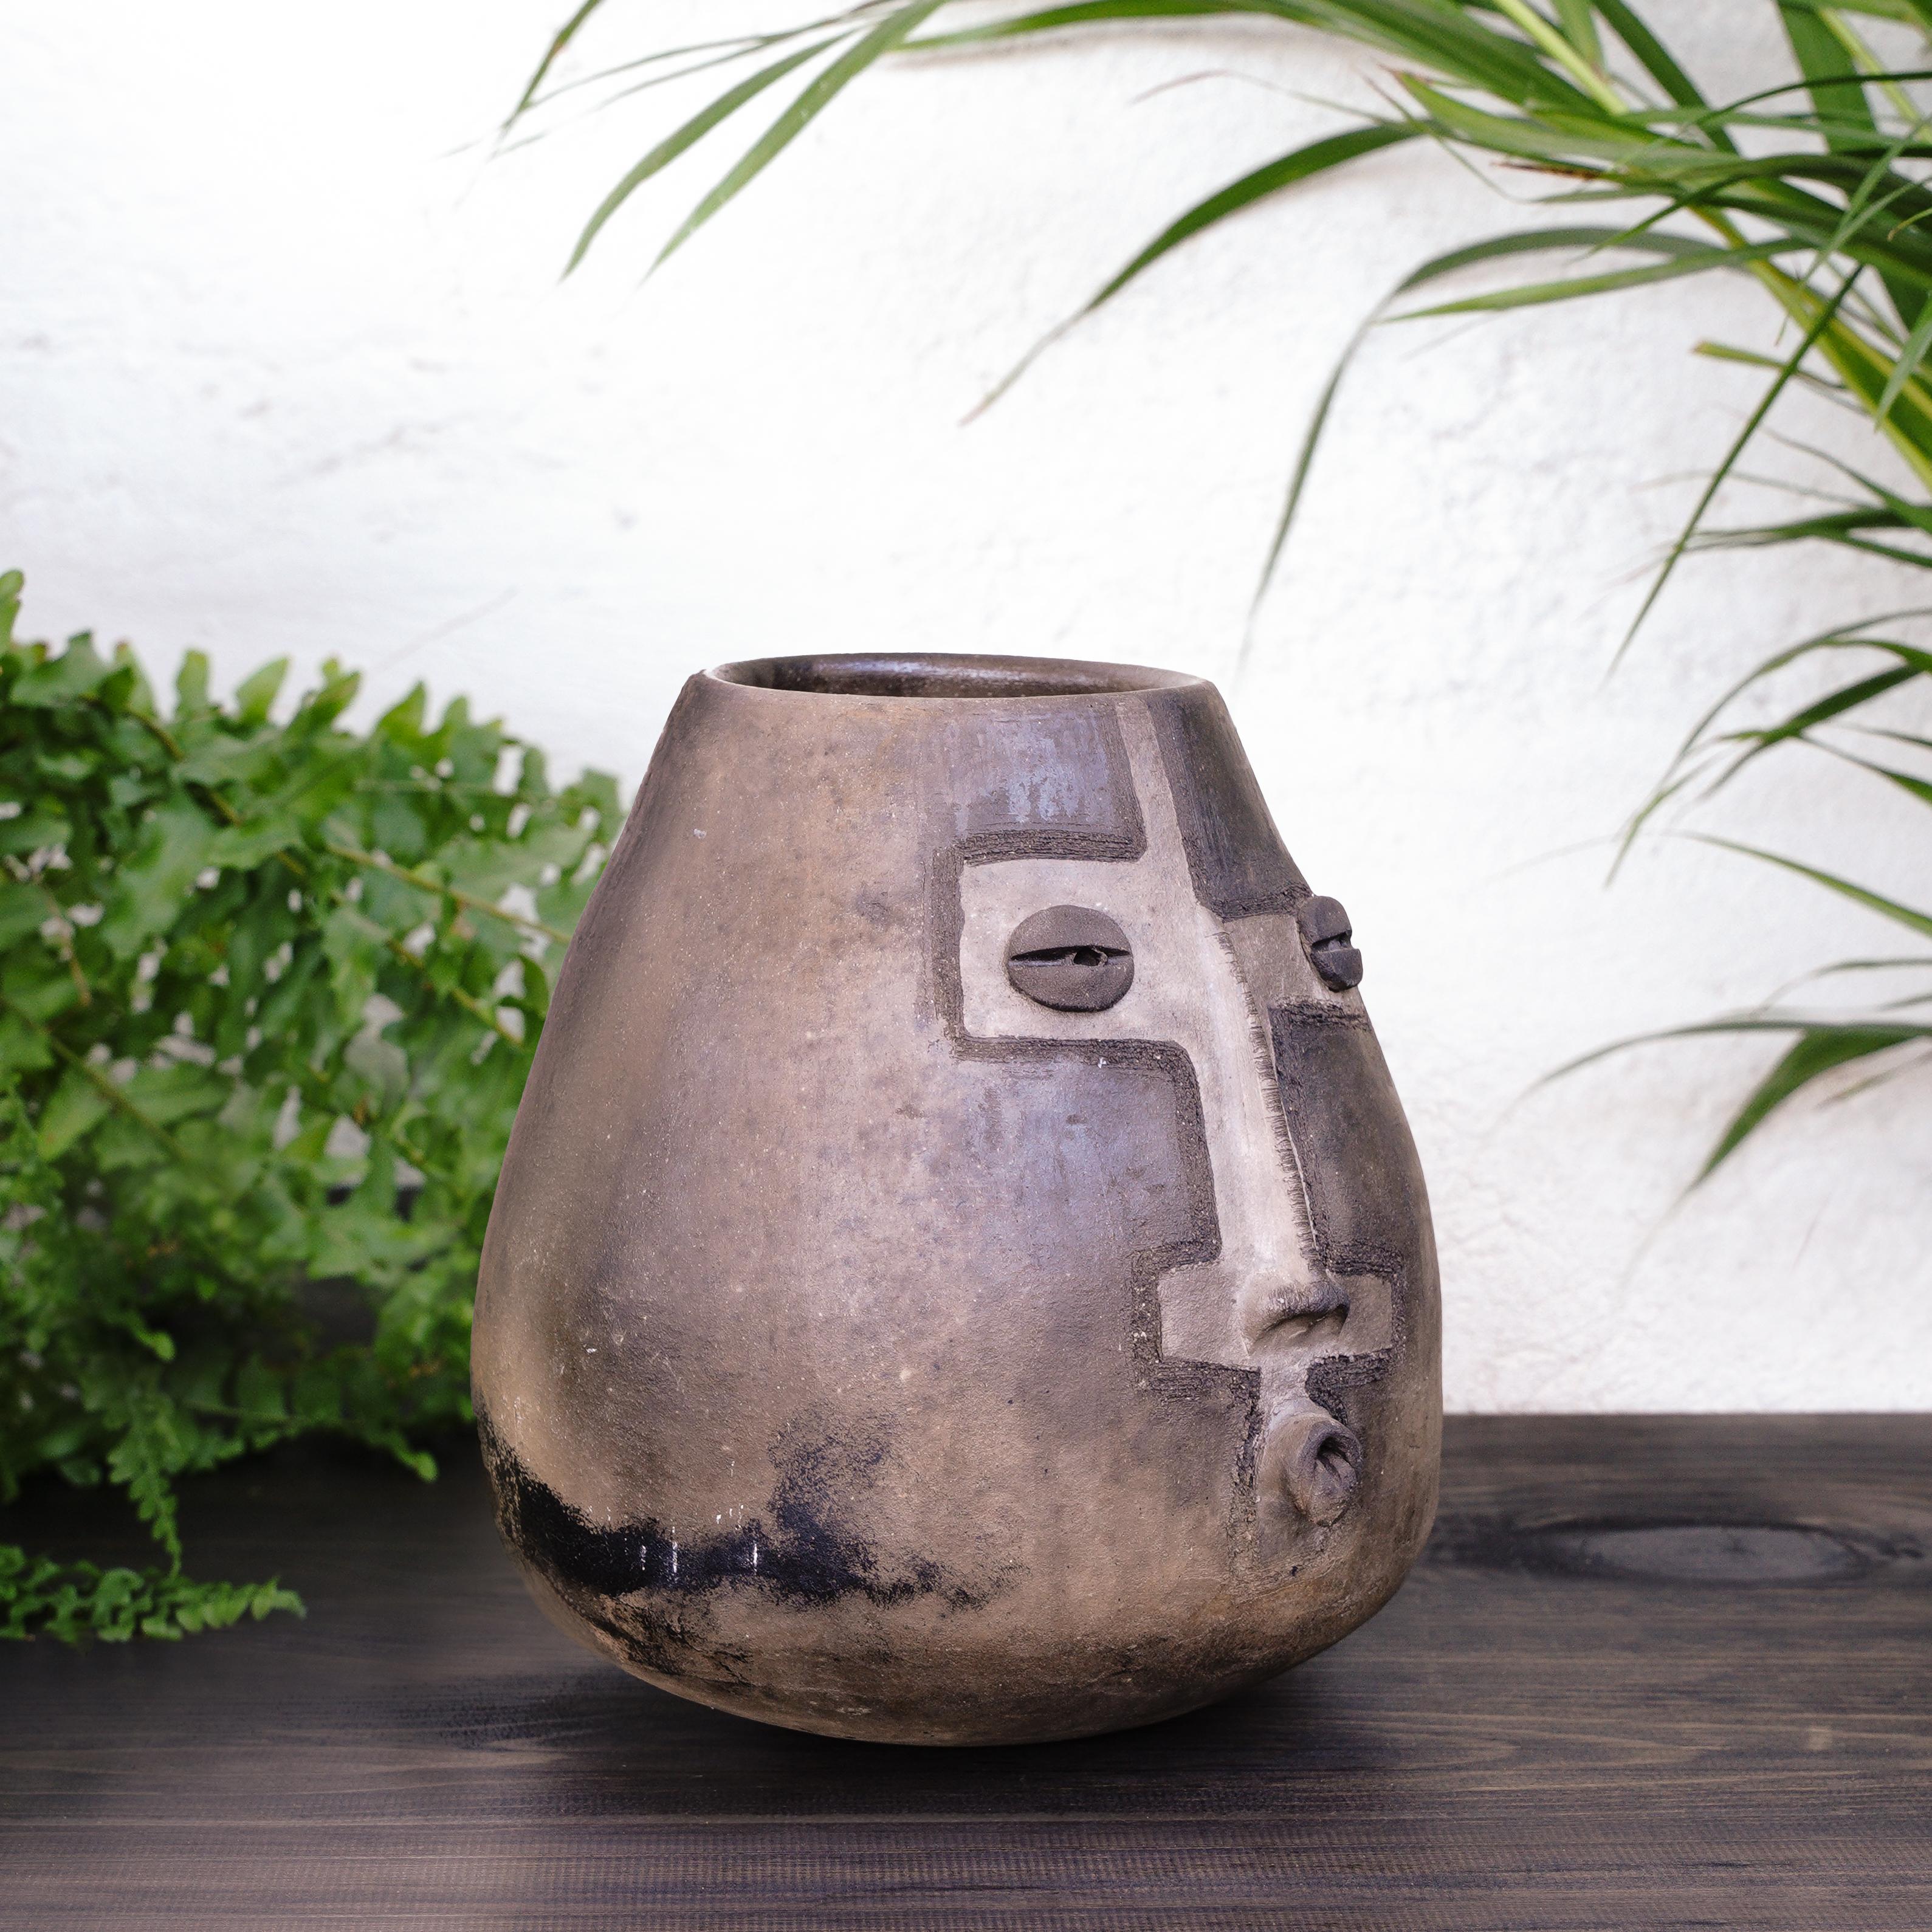 Stunning one-of-a-kind clay vase from Oaxaca, Mexico. Style and techniques evolved from generational traditions. 

Only one piece made. Only one piece available. As photographed.

Handmade by Leticia Blanco and her son, Fernando Peguero, of the